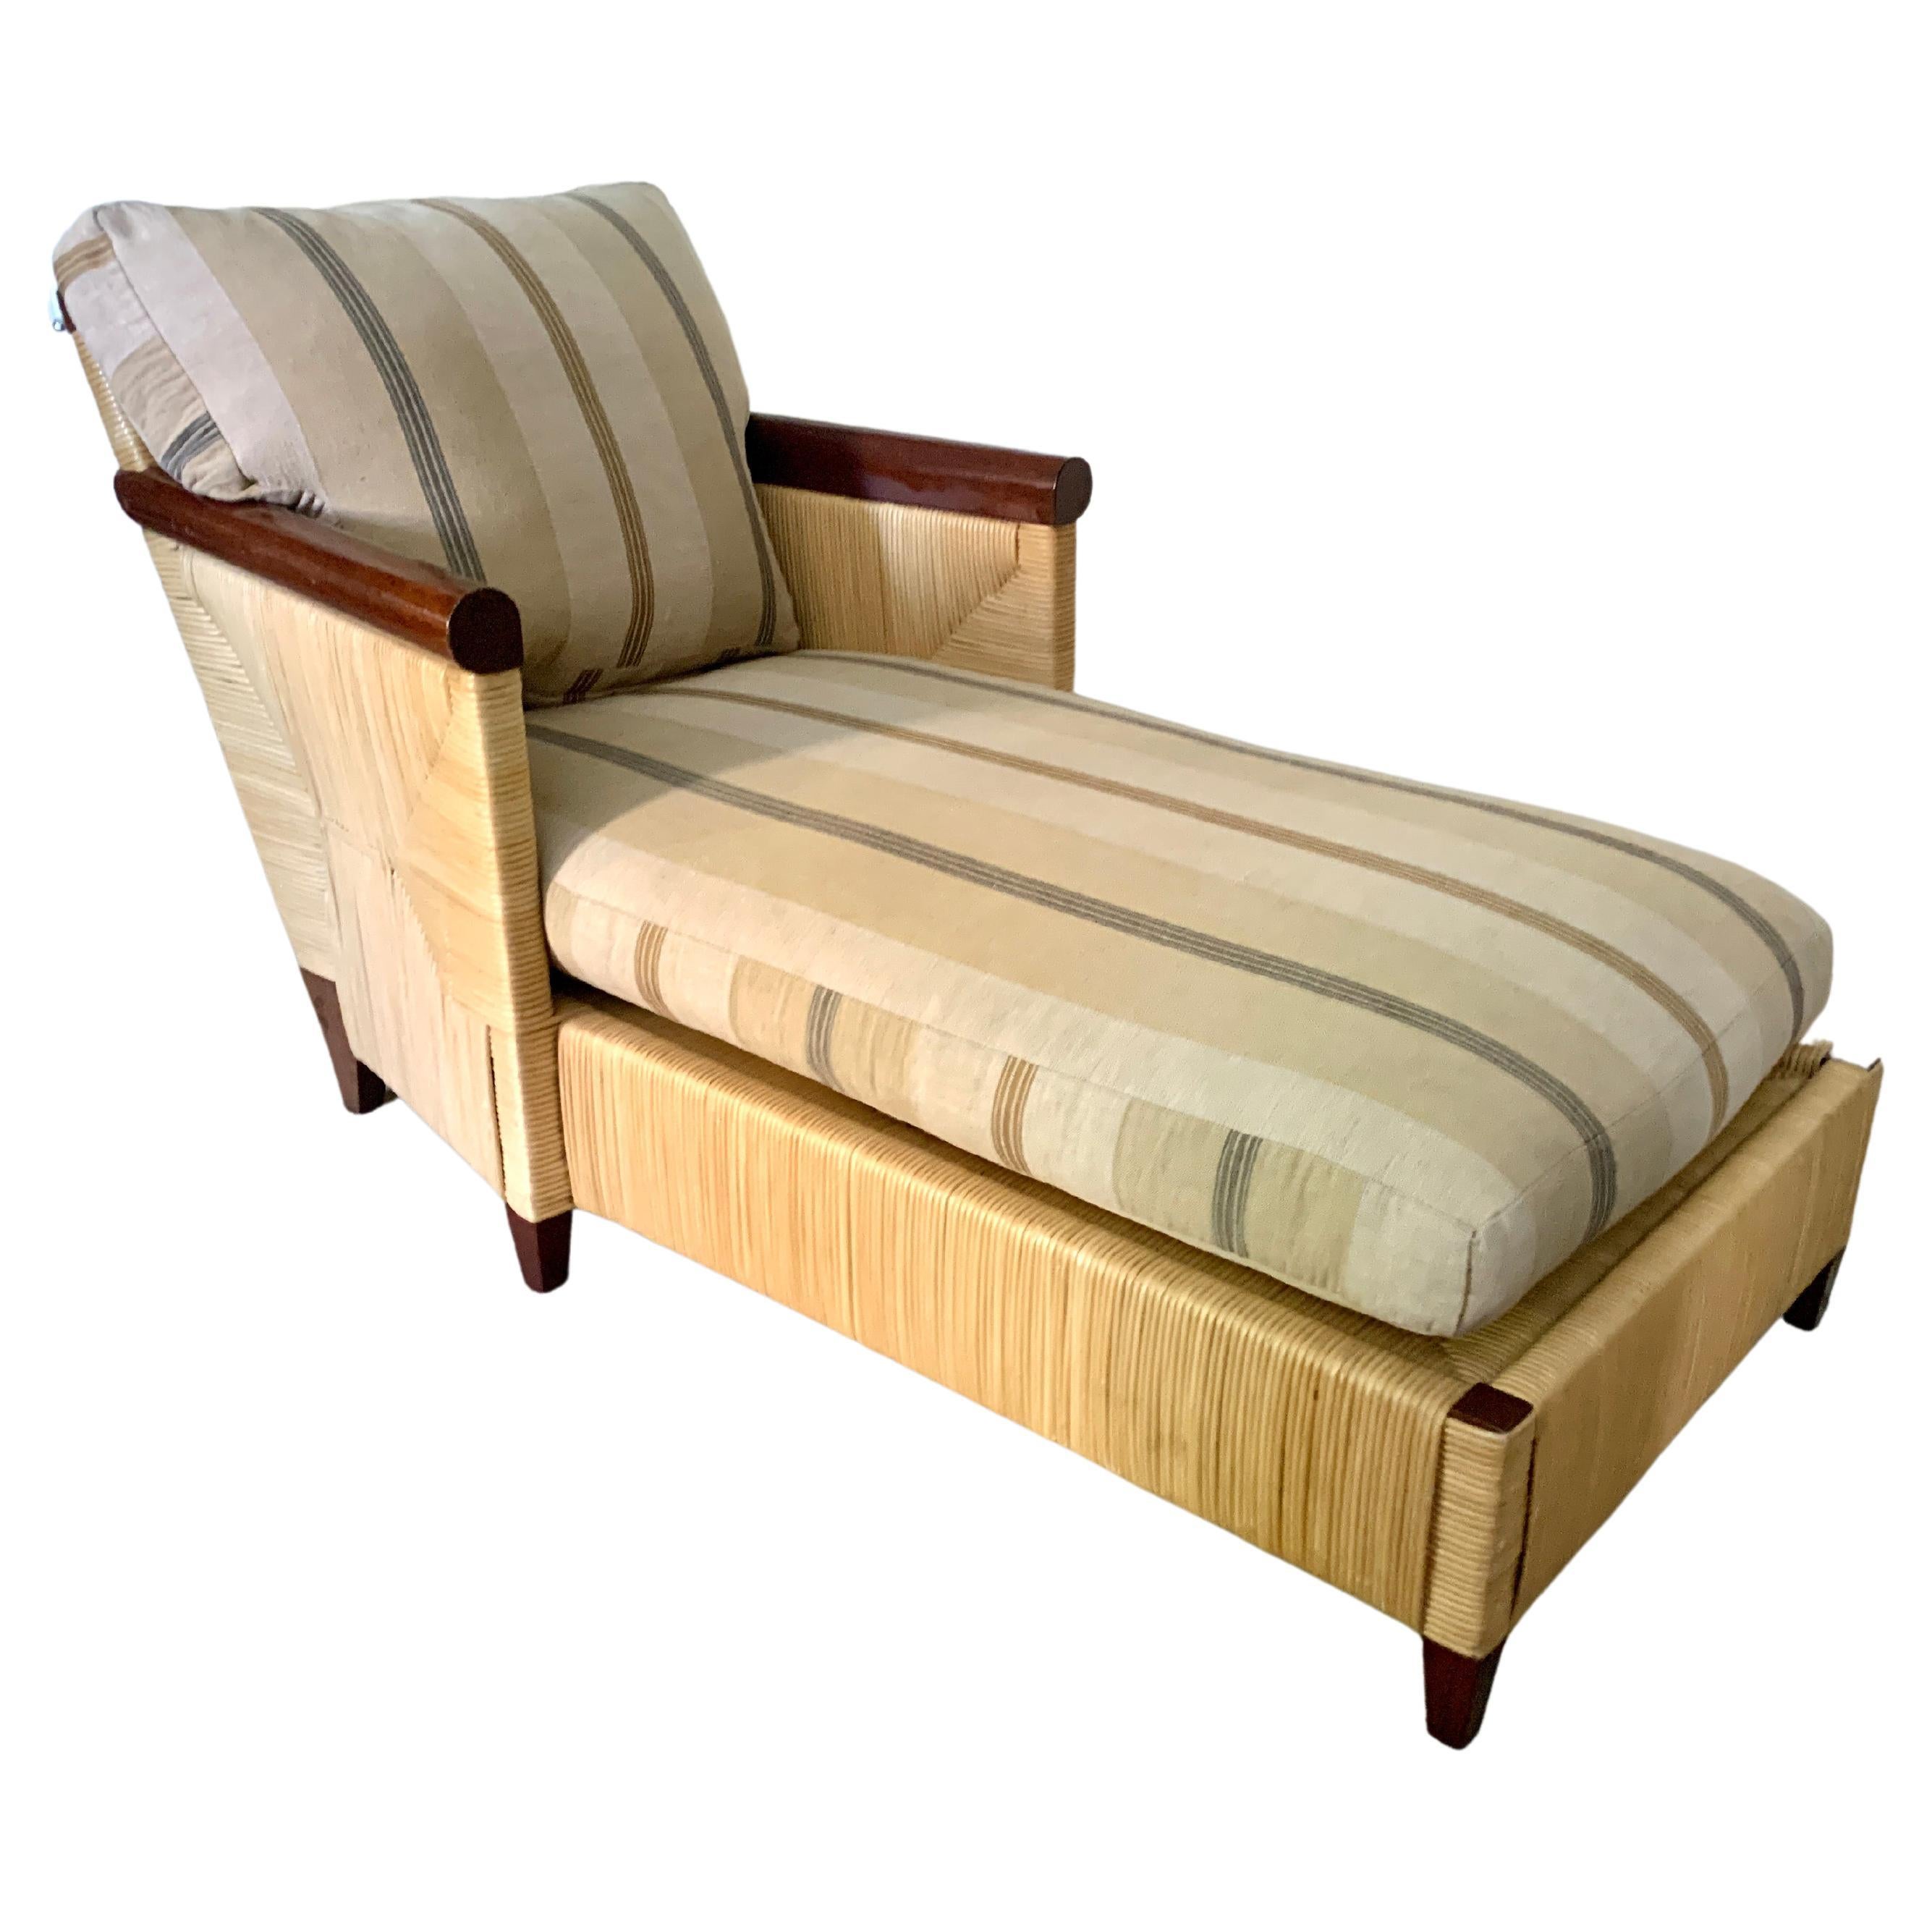 Rattan Chaise Lounge by John Hutton for Donghia Merbau Collection